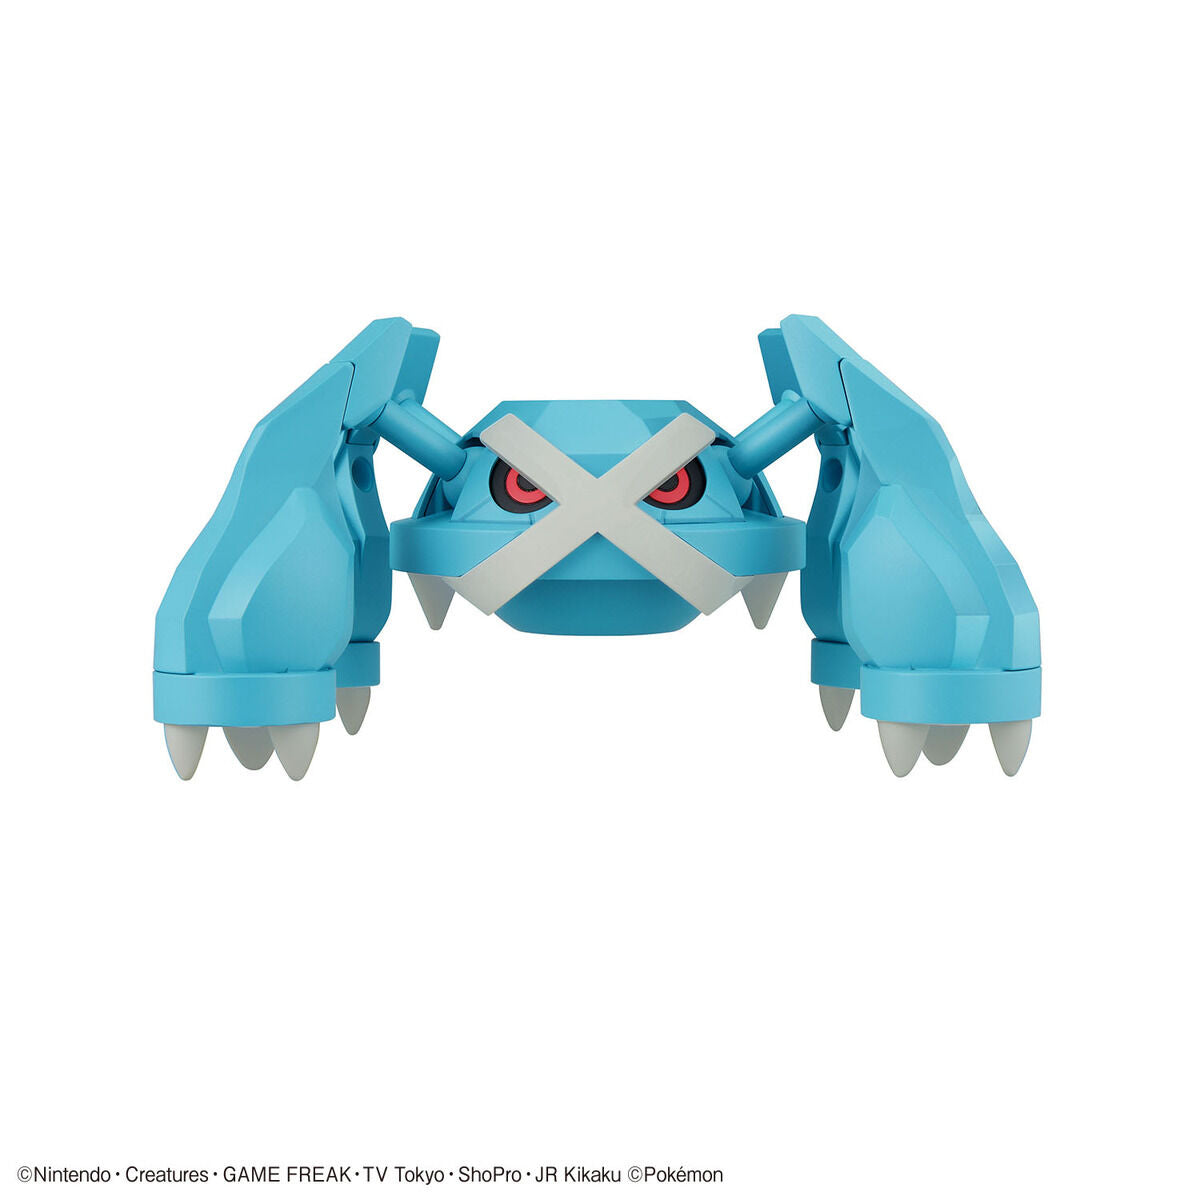 Pokémon - Metagross - Pokémon Model Kit Collection No.53 (Bandai), Axis movable leg parts for action poses, Flying pose option, Includes clear stand and sticker sheet, Franchise: Pokémon, Brand: Bandai, Release Date: 2023-02-18, Type: Model Kit, Store Name: Nippon Figures